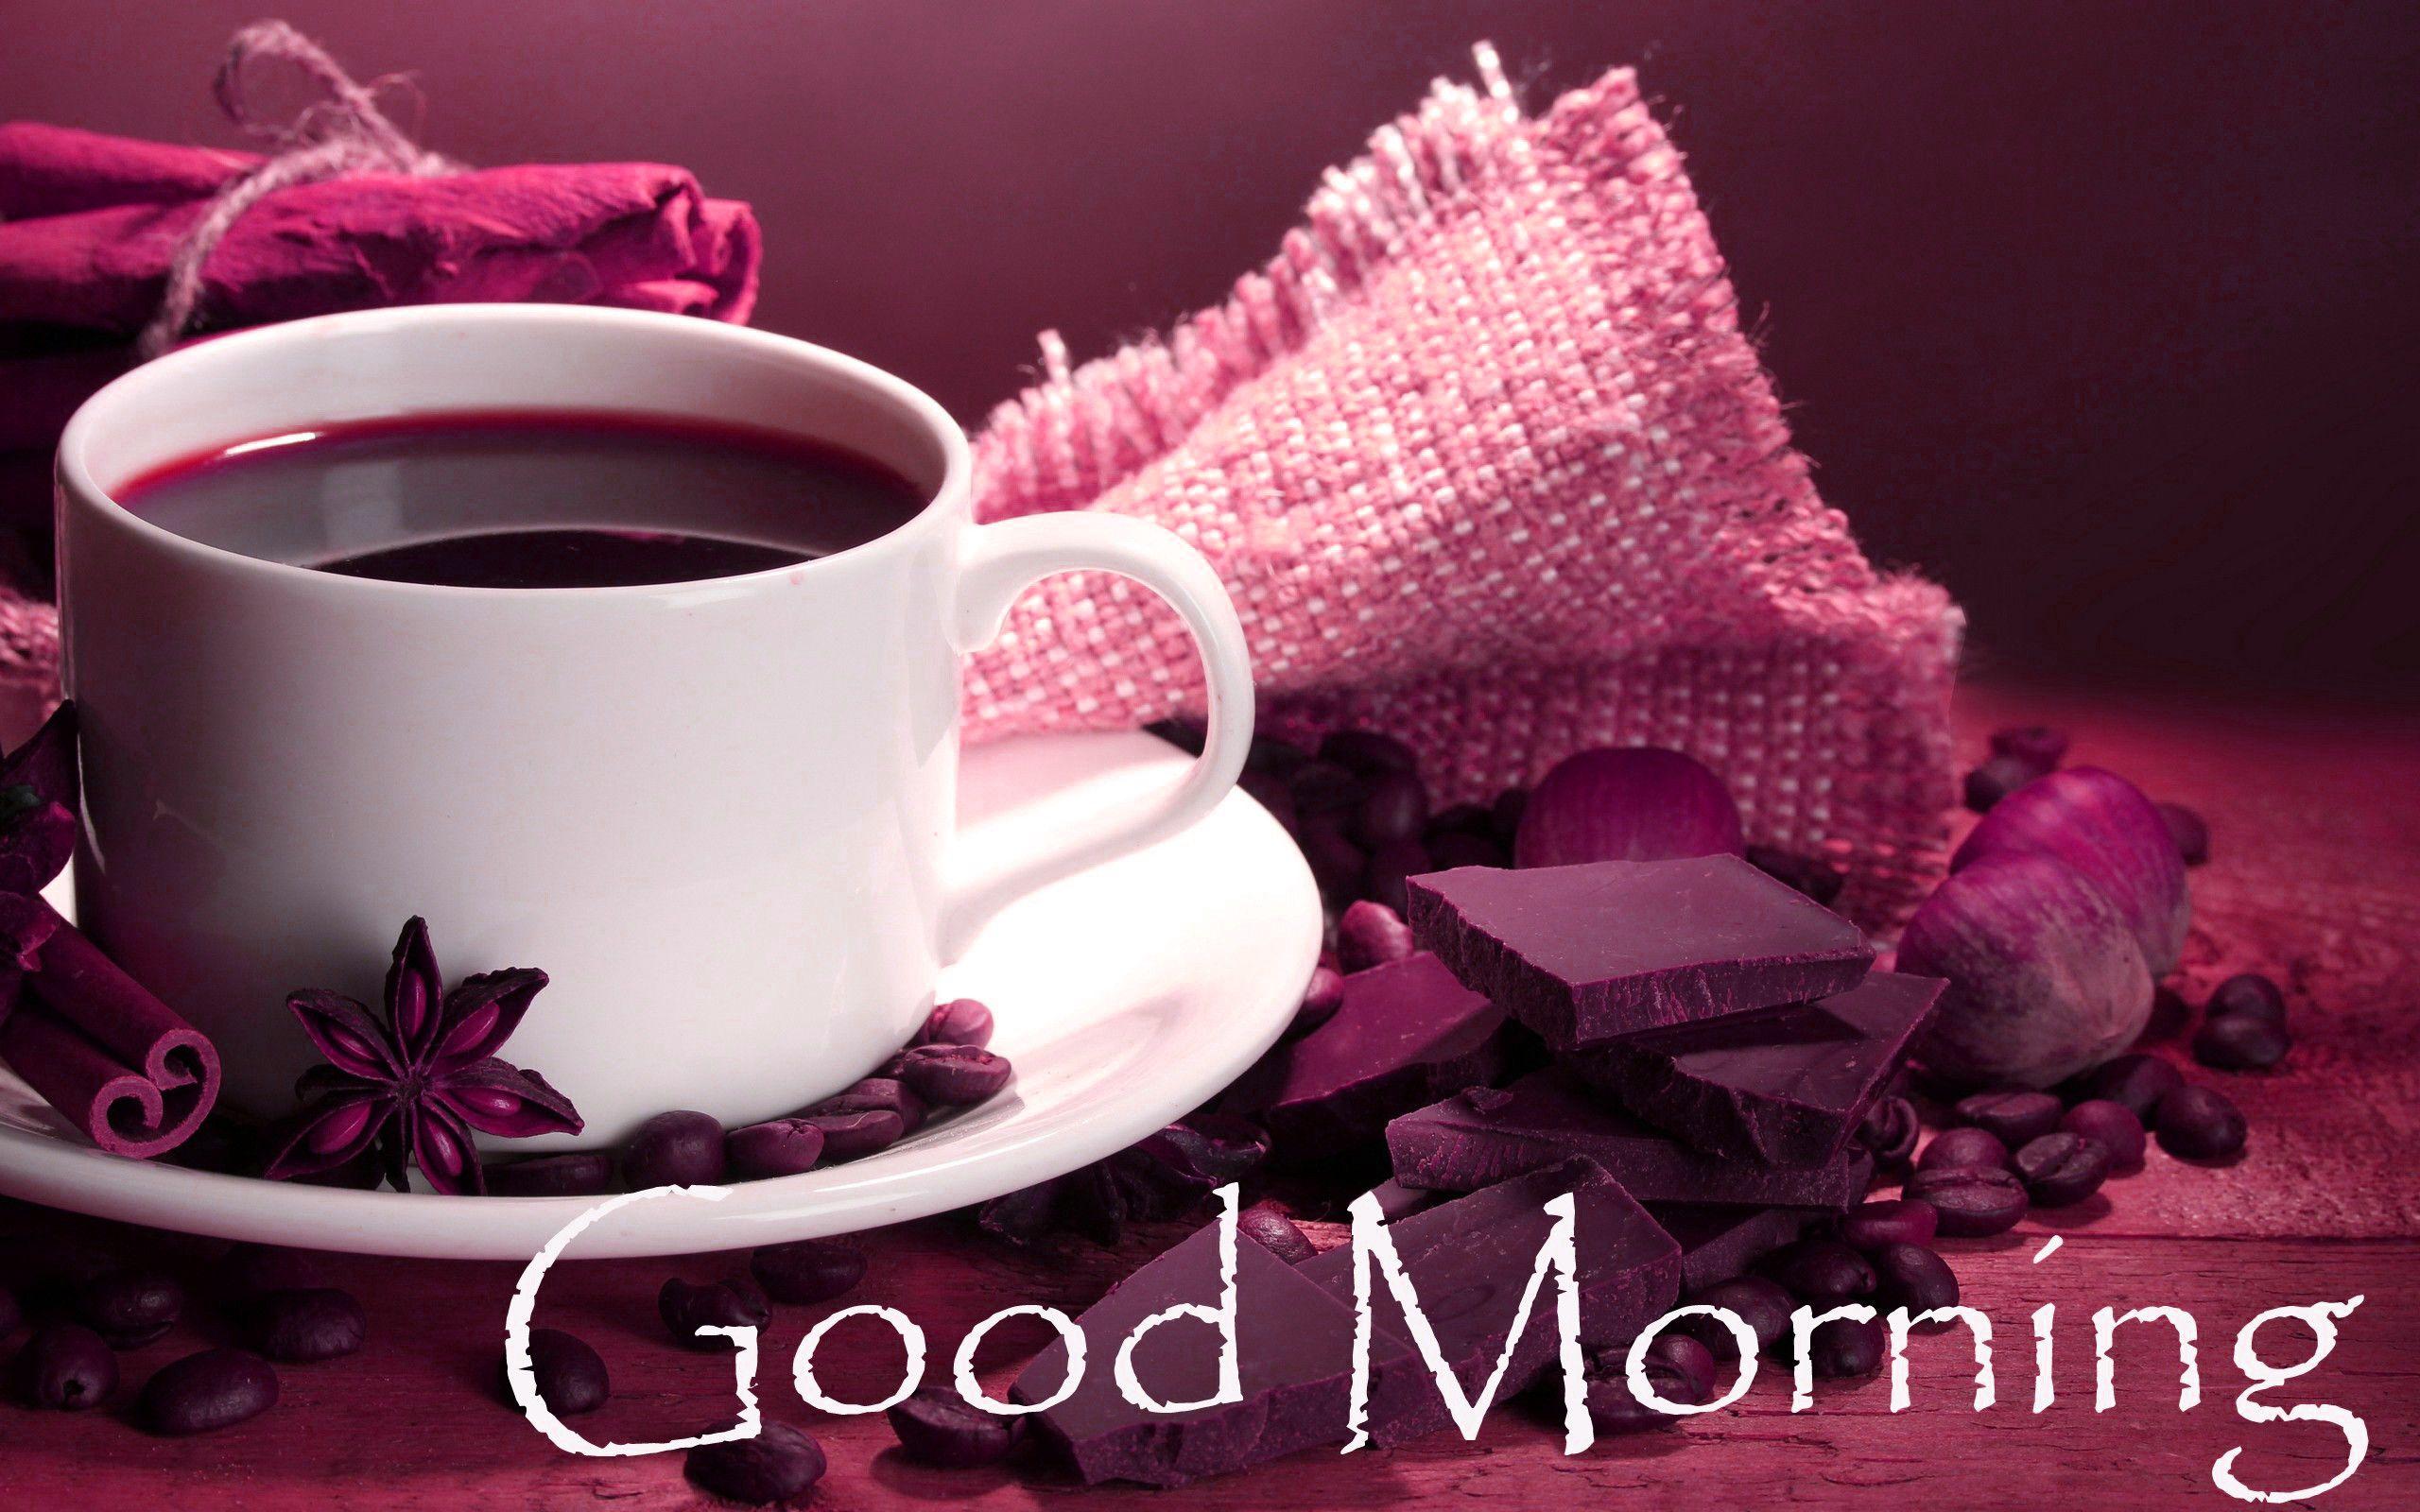 Download Good Morning Wednesday Lovely Greeting Wallpaper | Wallpapers.com